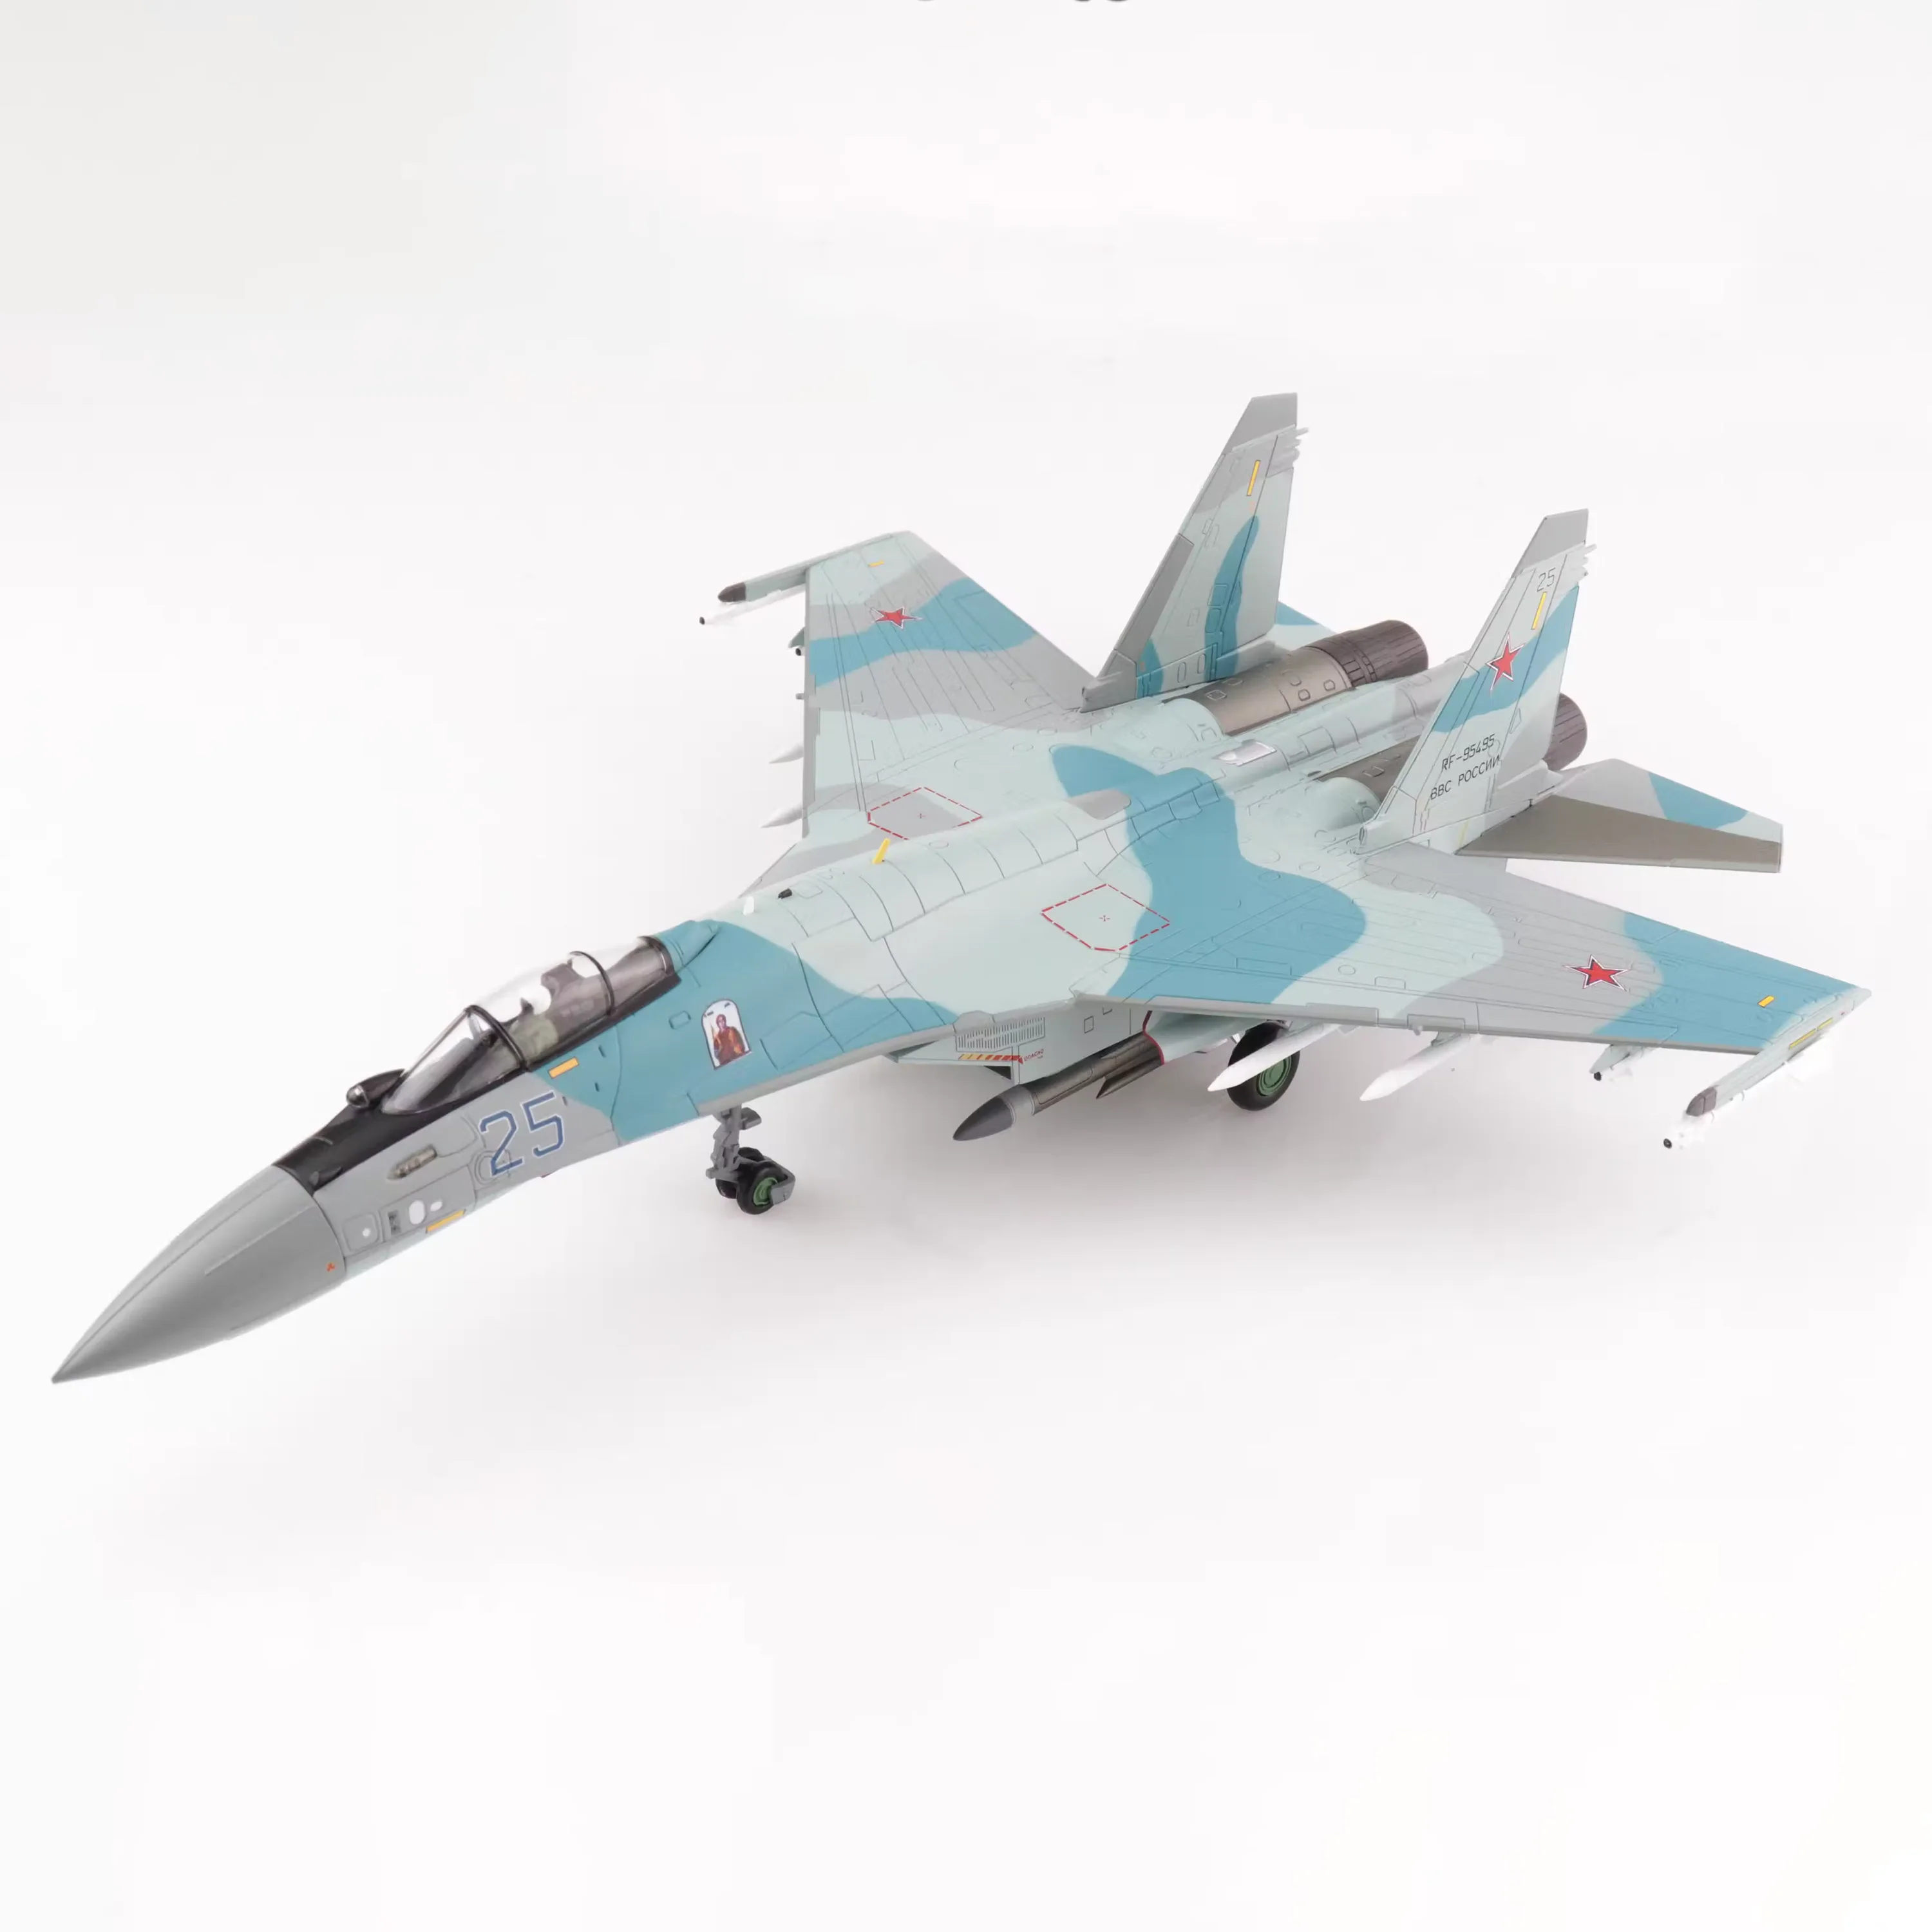 

1:72 Scale Russian Air Force SU-35 Warplane Alloy & Plastic Simulation Model Gift Collection Decorative Toy Diecast Display